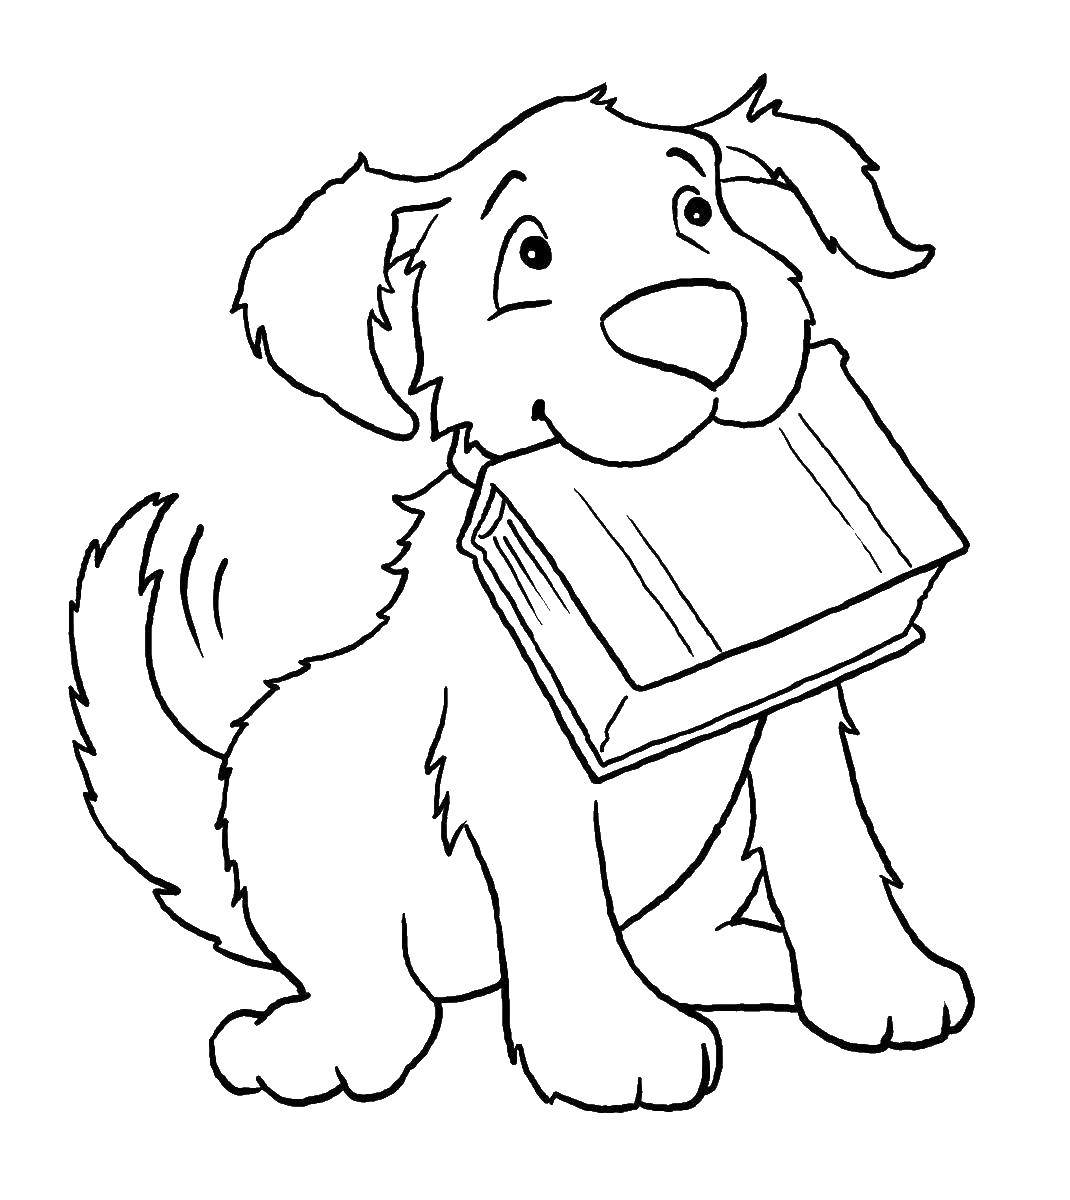 Coloring Dog with a book. Category Pets allowed. Tags:  the dog, books.